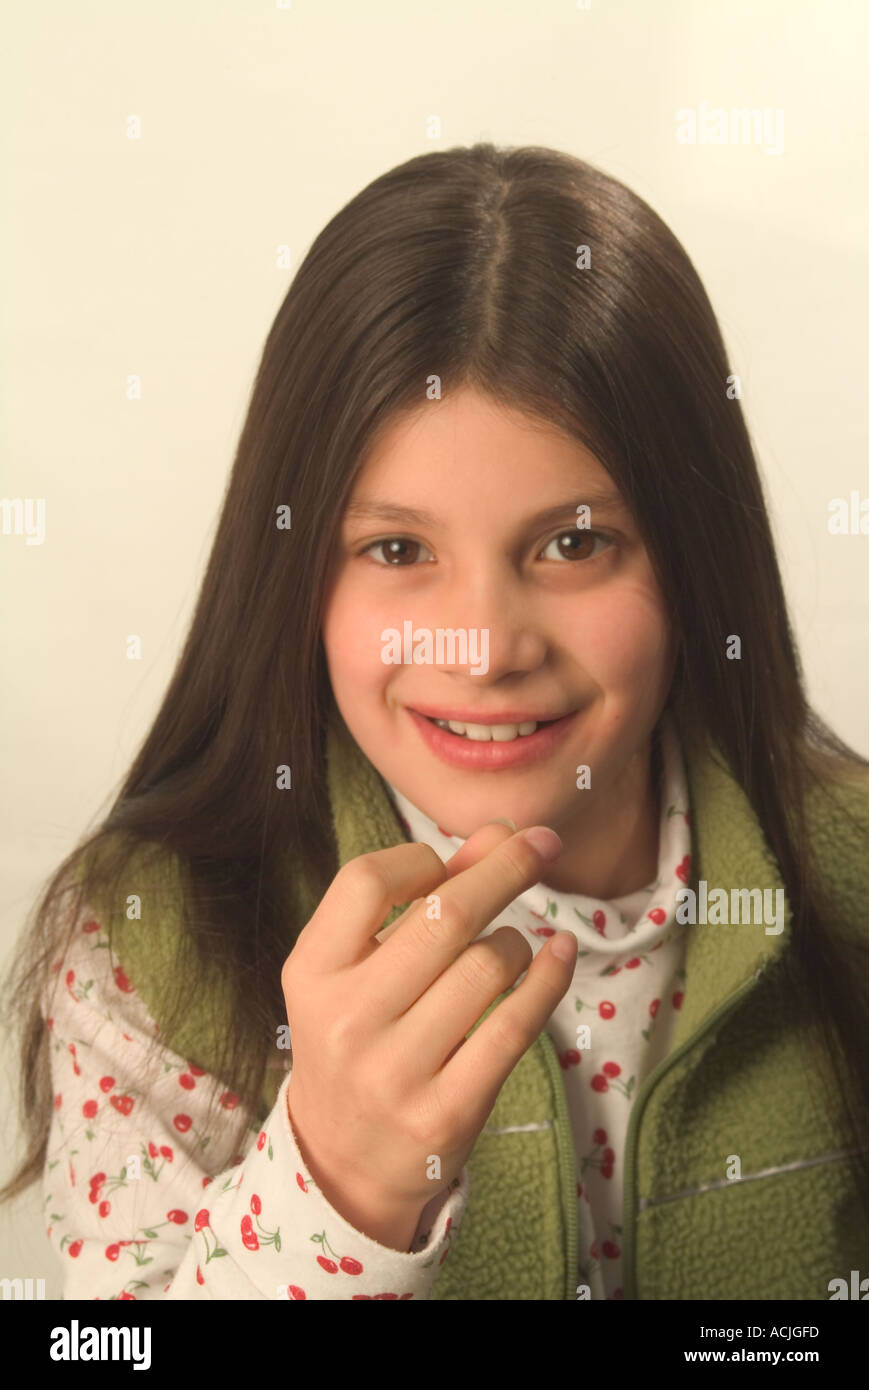 9 year old girl snapping her fingers Stock Photo